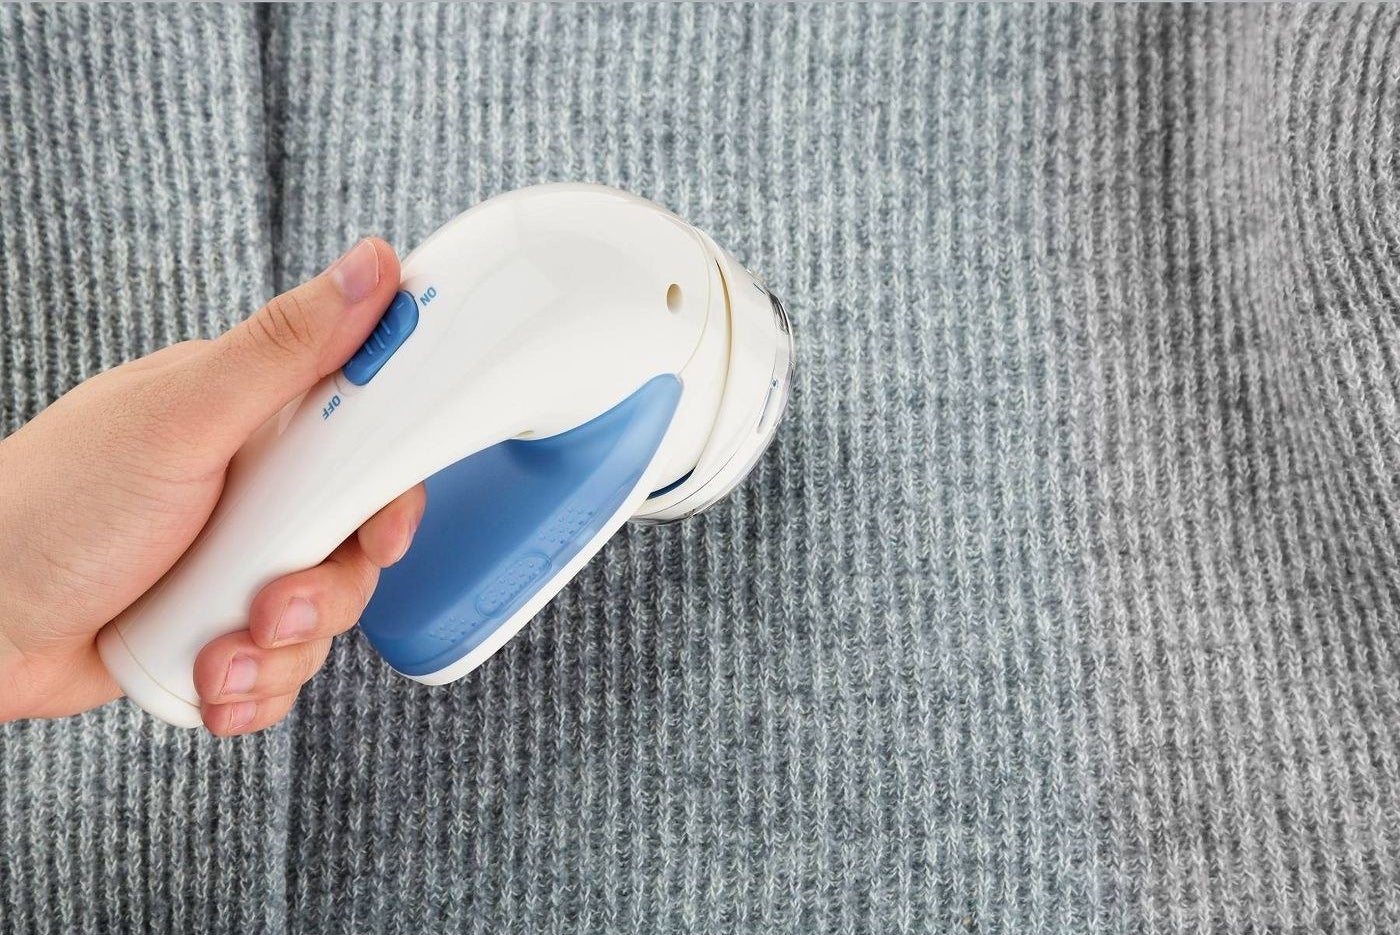 A blue and white fabric shaver in use